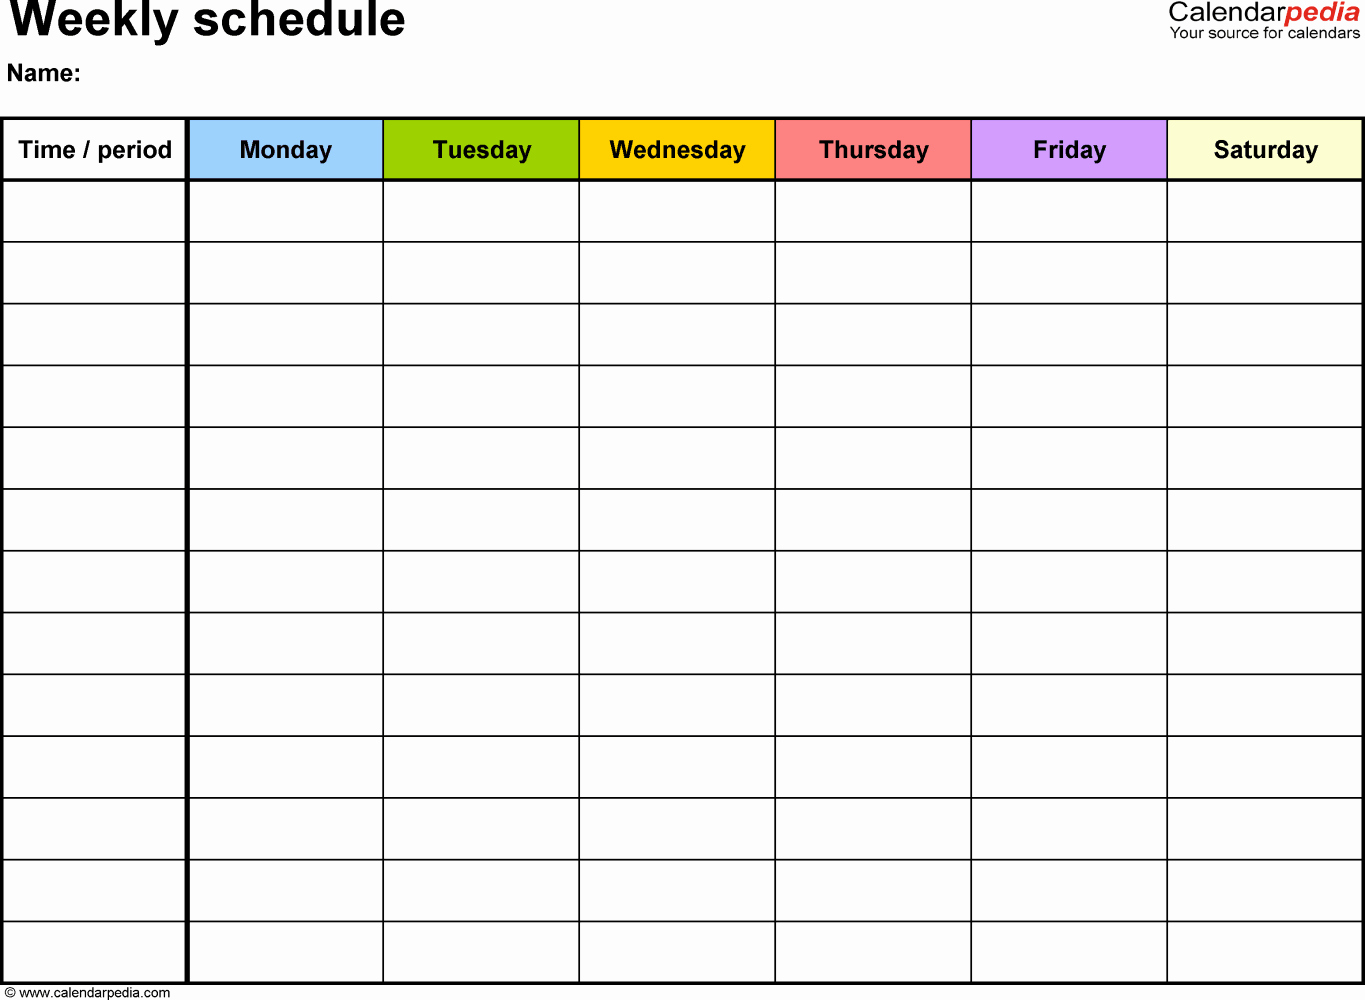 Monthly Schedule Template Excel New Free Weekly Schedule Templates for Excel 18 Templates